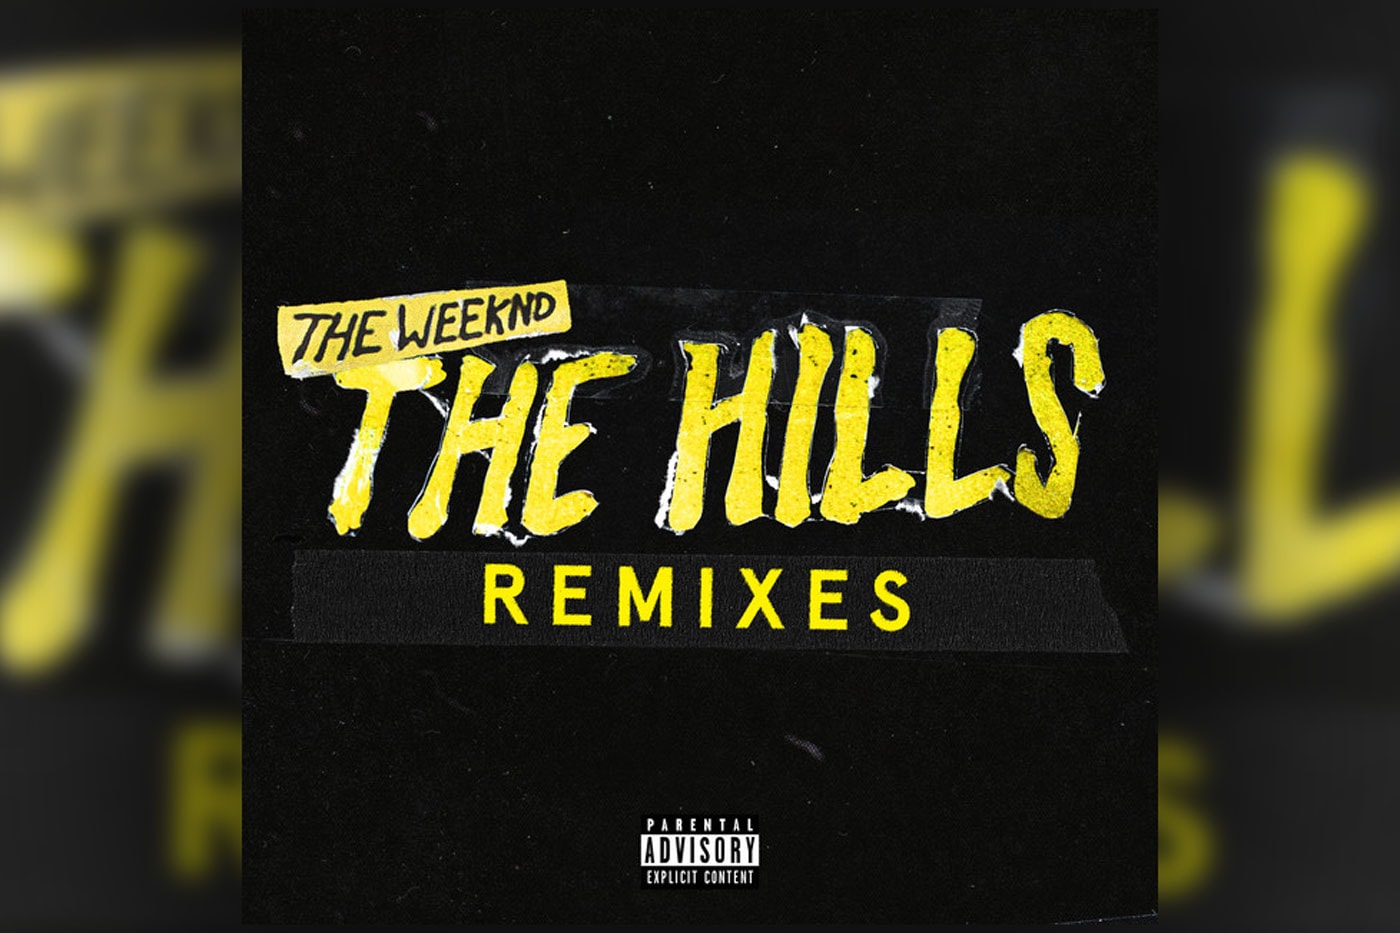 The Weeknd Drops Two "The Hills" Remixes With Eminem and Nicki Minaj